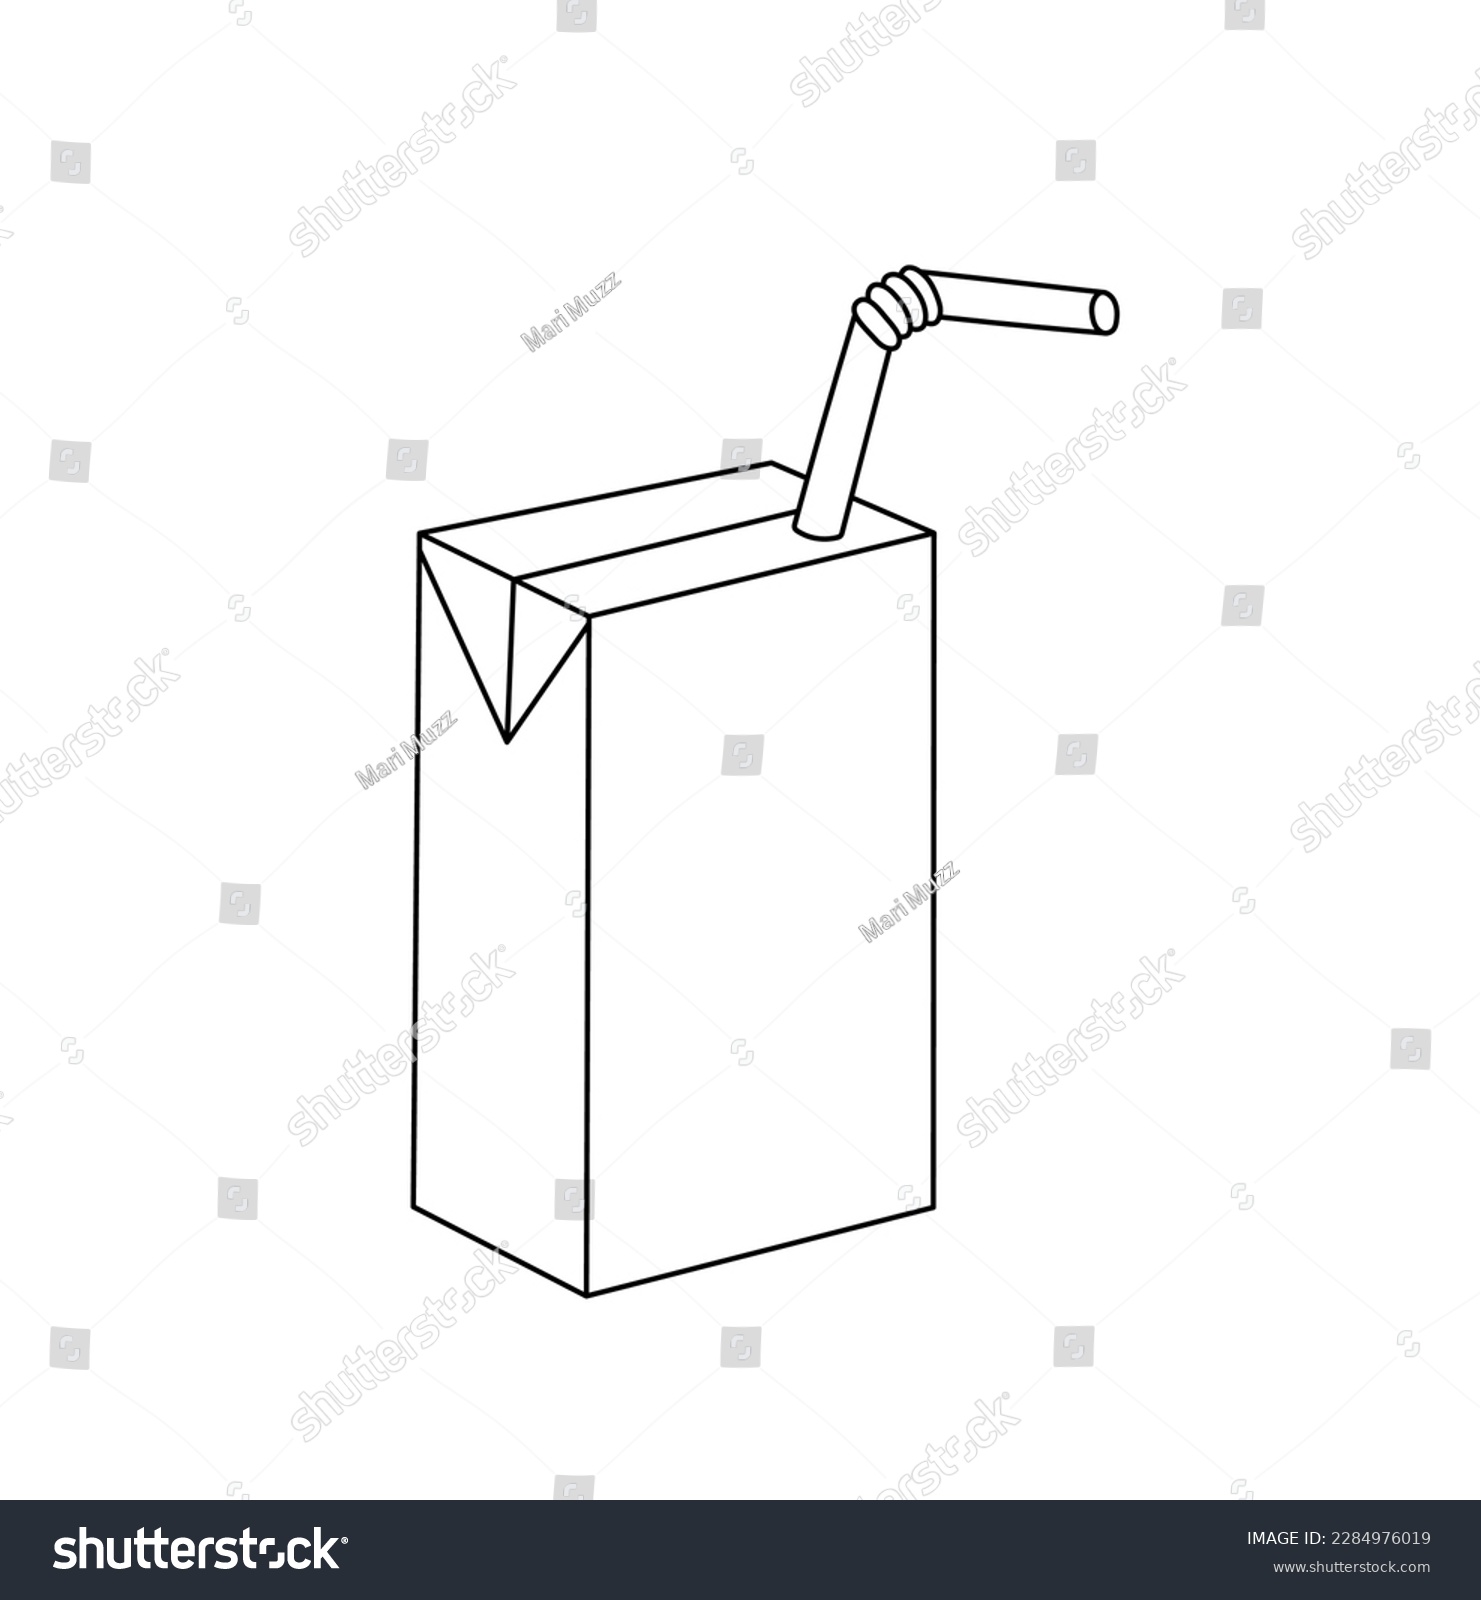 SVG of Vector isolated one single cardboard juice or milk little box with plastic straw colorless black and white contour line easy drawing svg